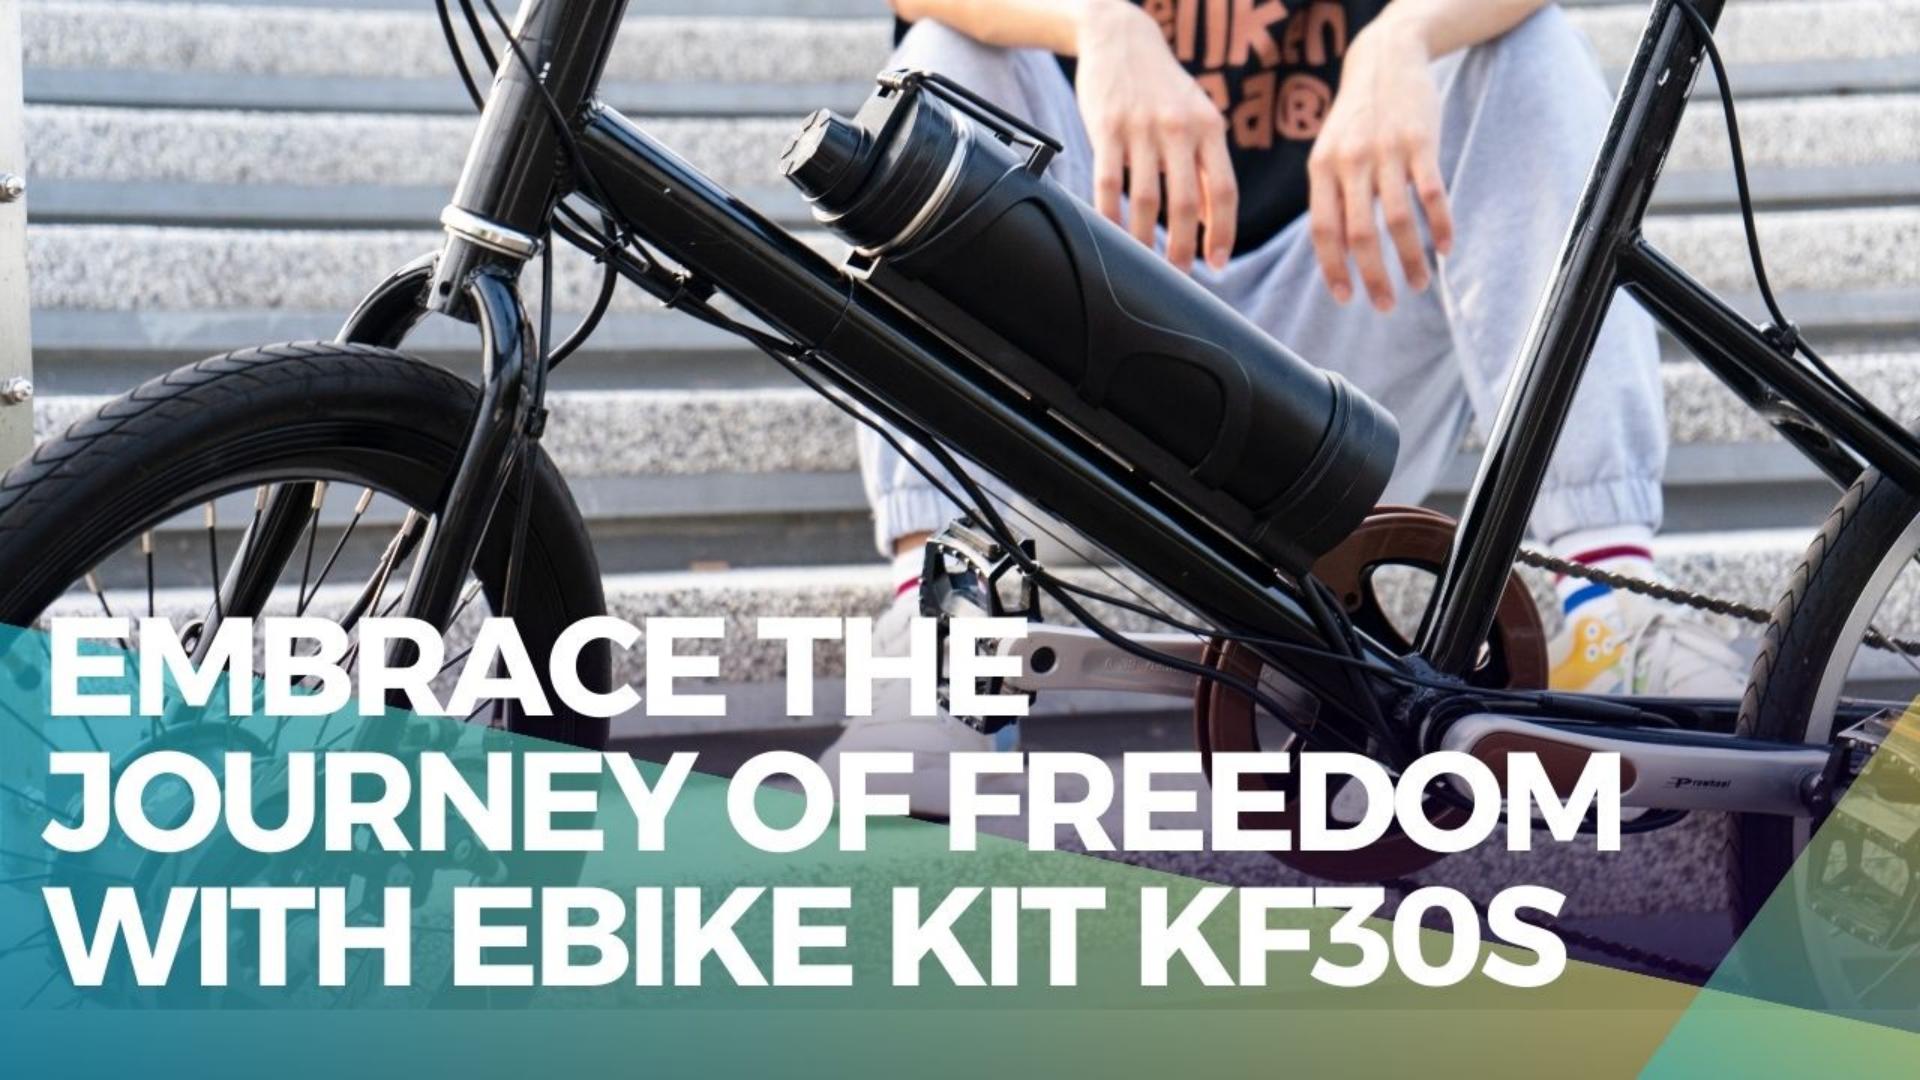 Embrace the Journey of Freedom with ebike kit kf30s!